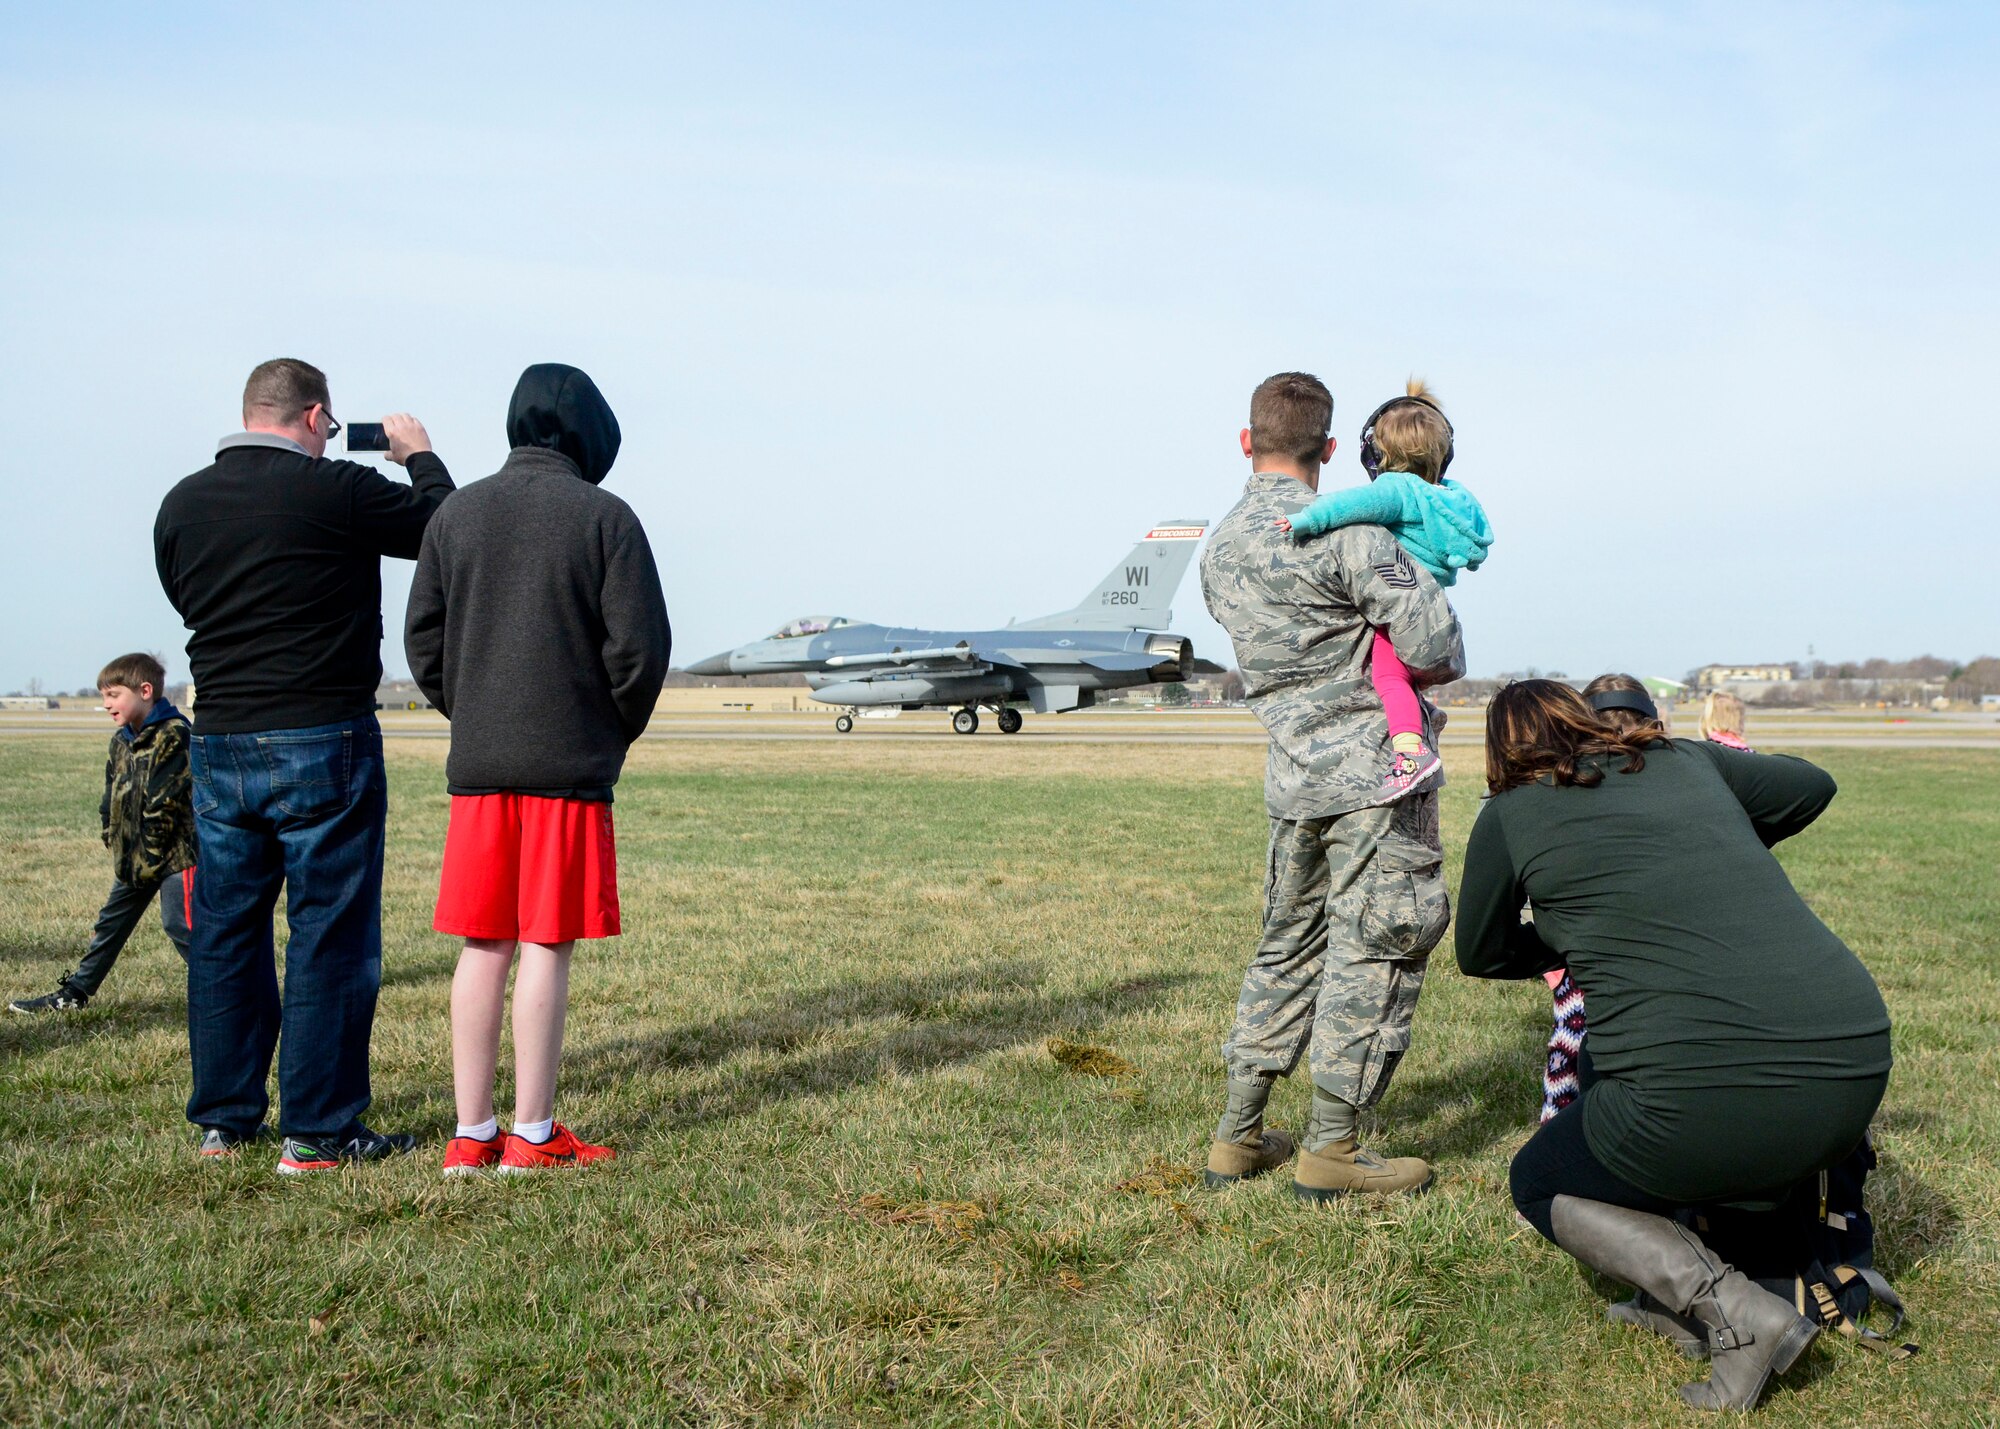 Airmen and their families watch as an F-16 Fighting Falcon prepares for takeoff April 26, 2018 at Truax Field, Wis. This was one of many demonstrations put on by the 115th Fighter Wing for National Take Our Daughters and Sons to Work Day.
(U.S. Air National Guard photo by Mary Greenwood)